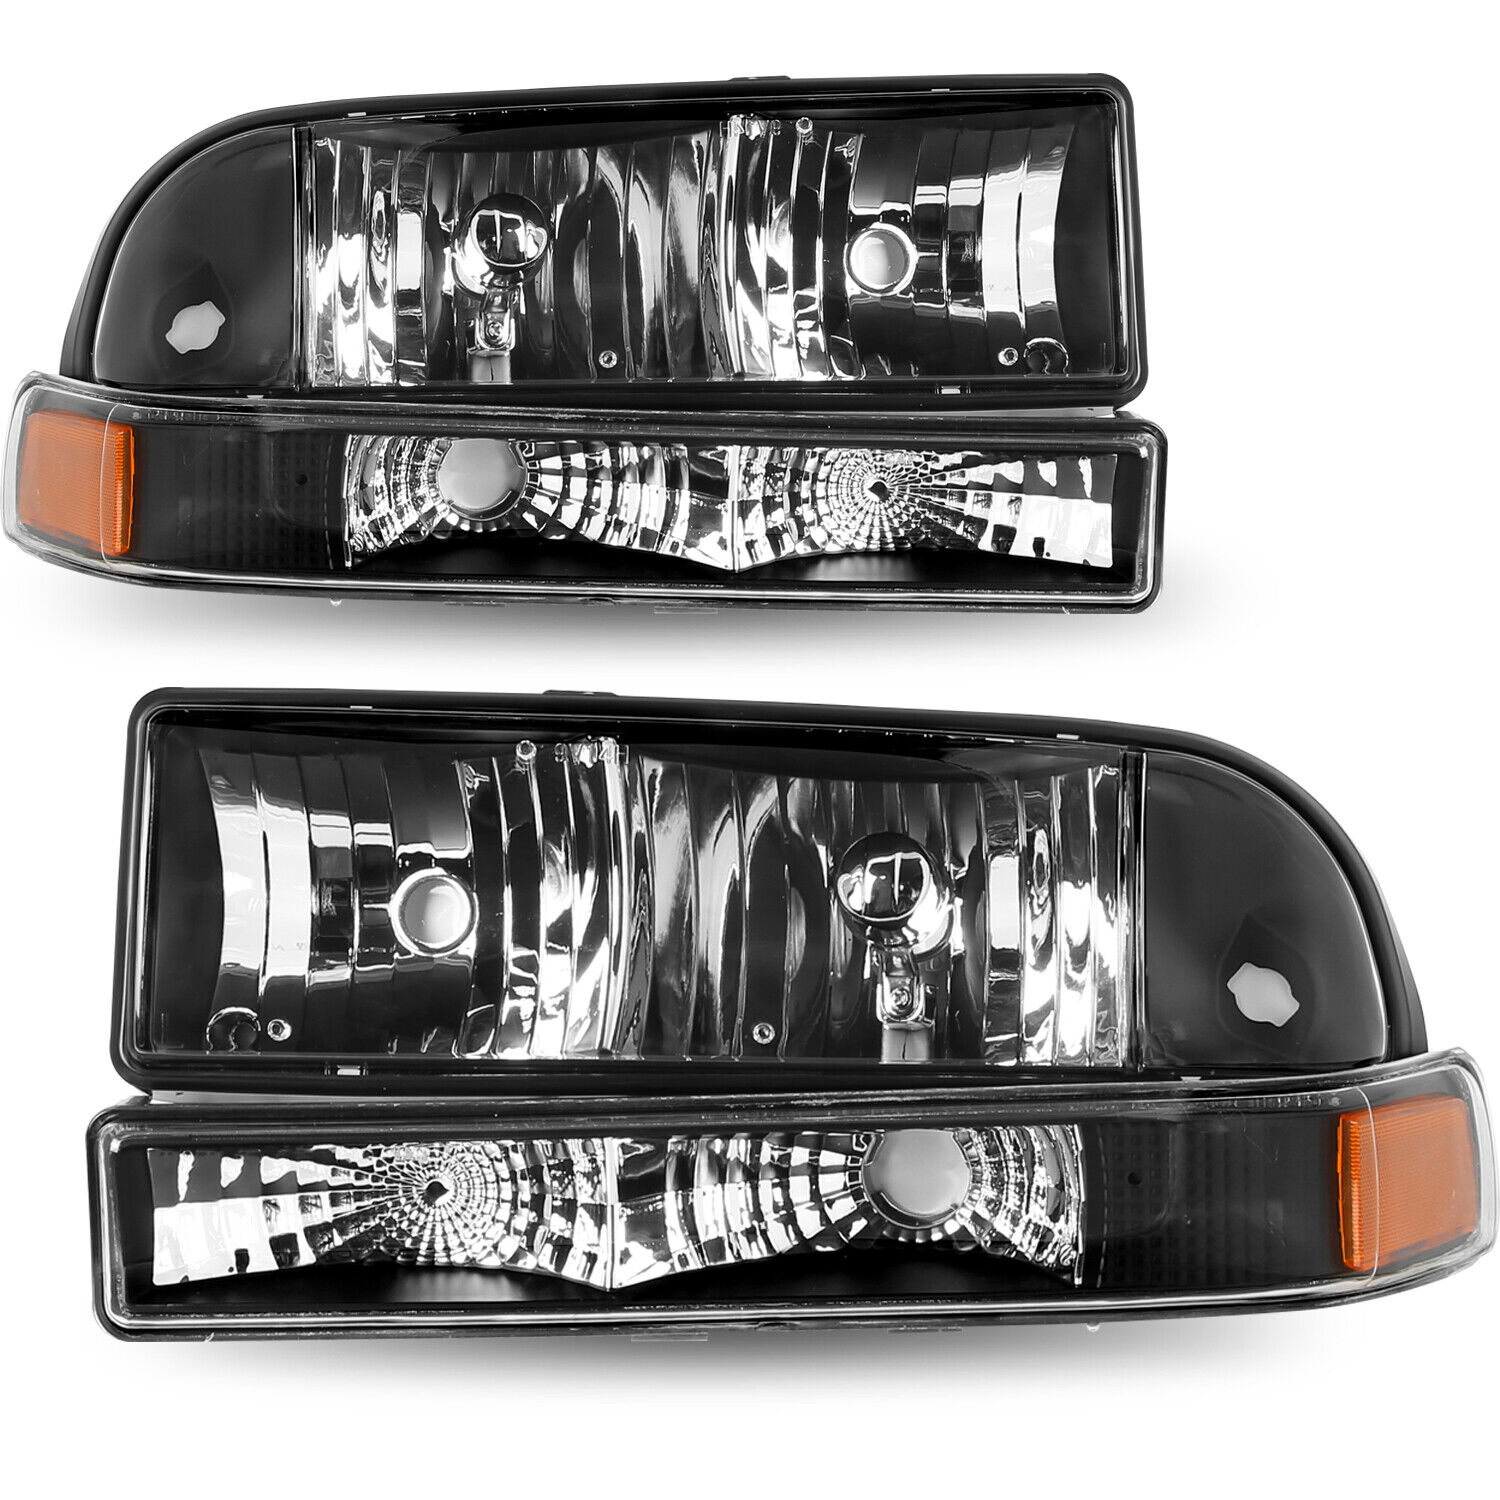 For 1998-2005 Chevy s10 Blazer Black Housing Amber Headlights Assembly L+R 98-05